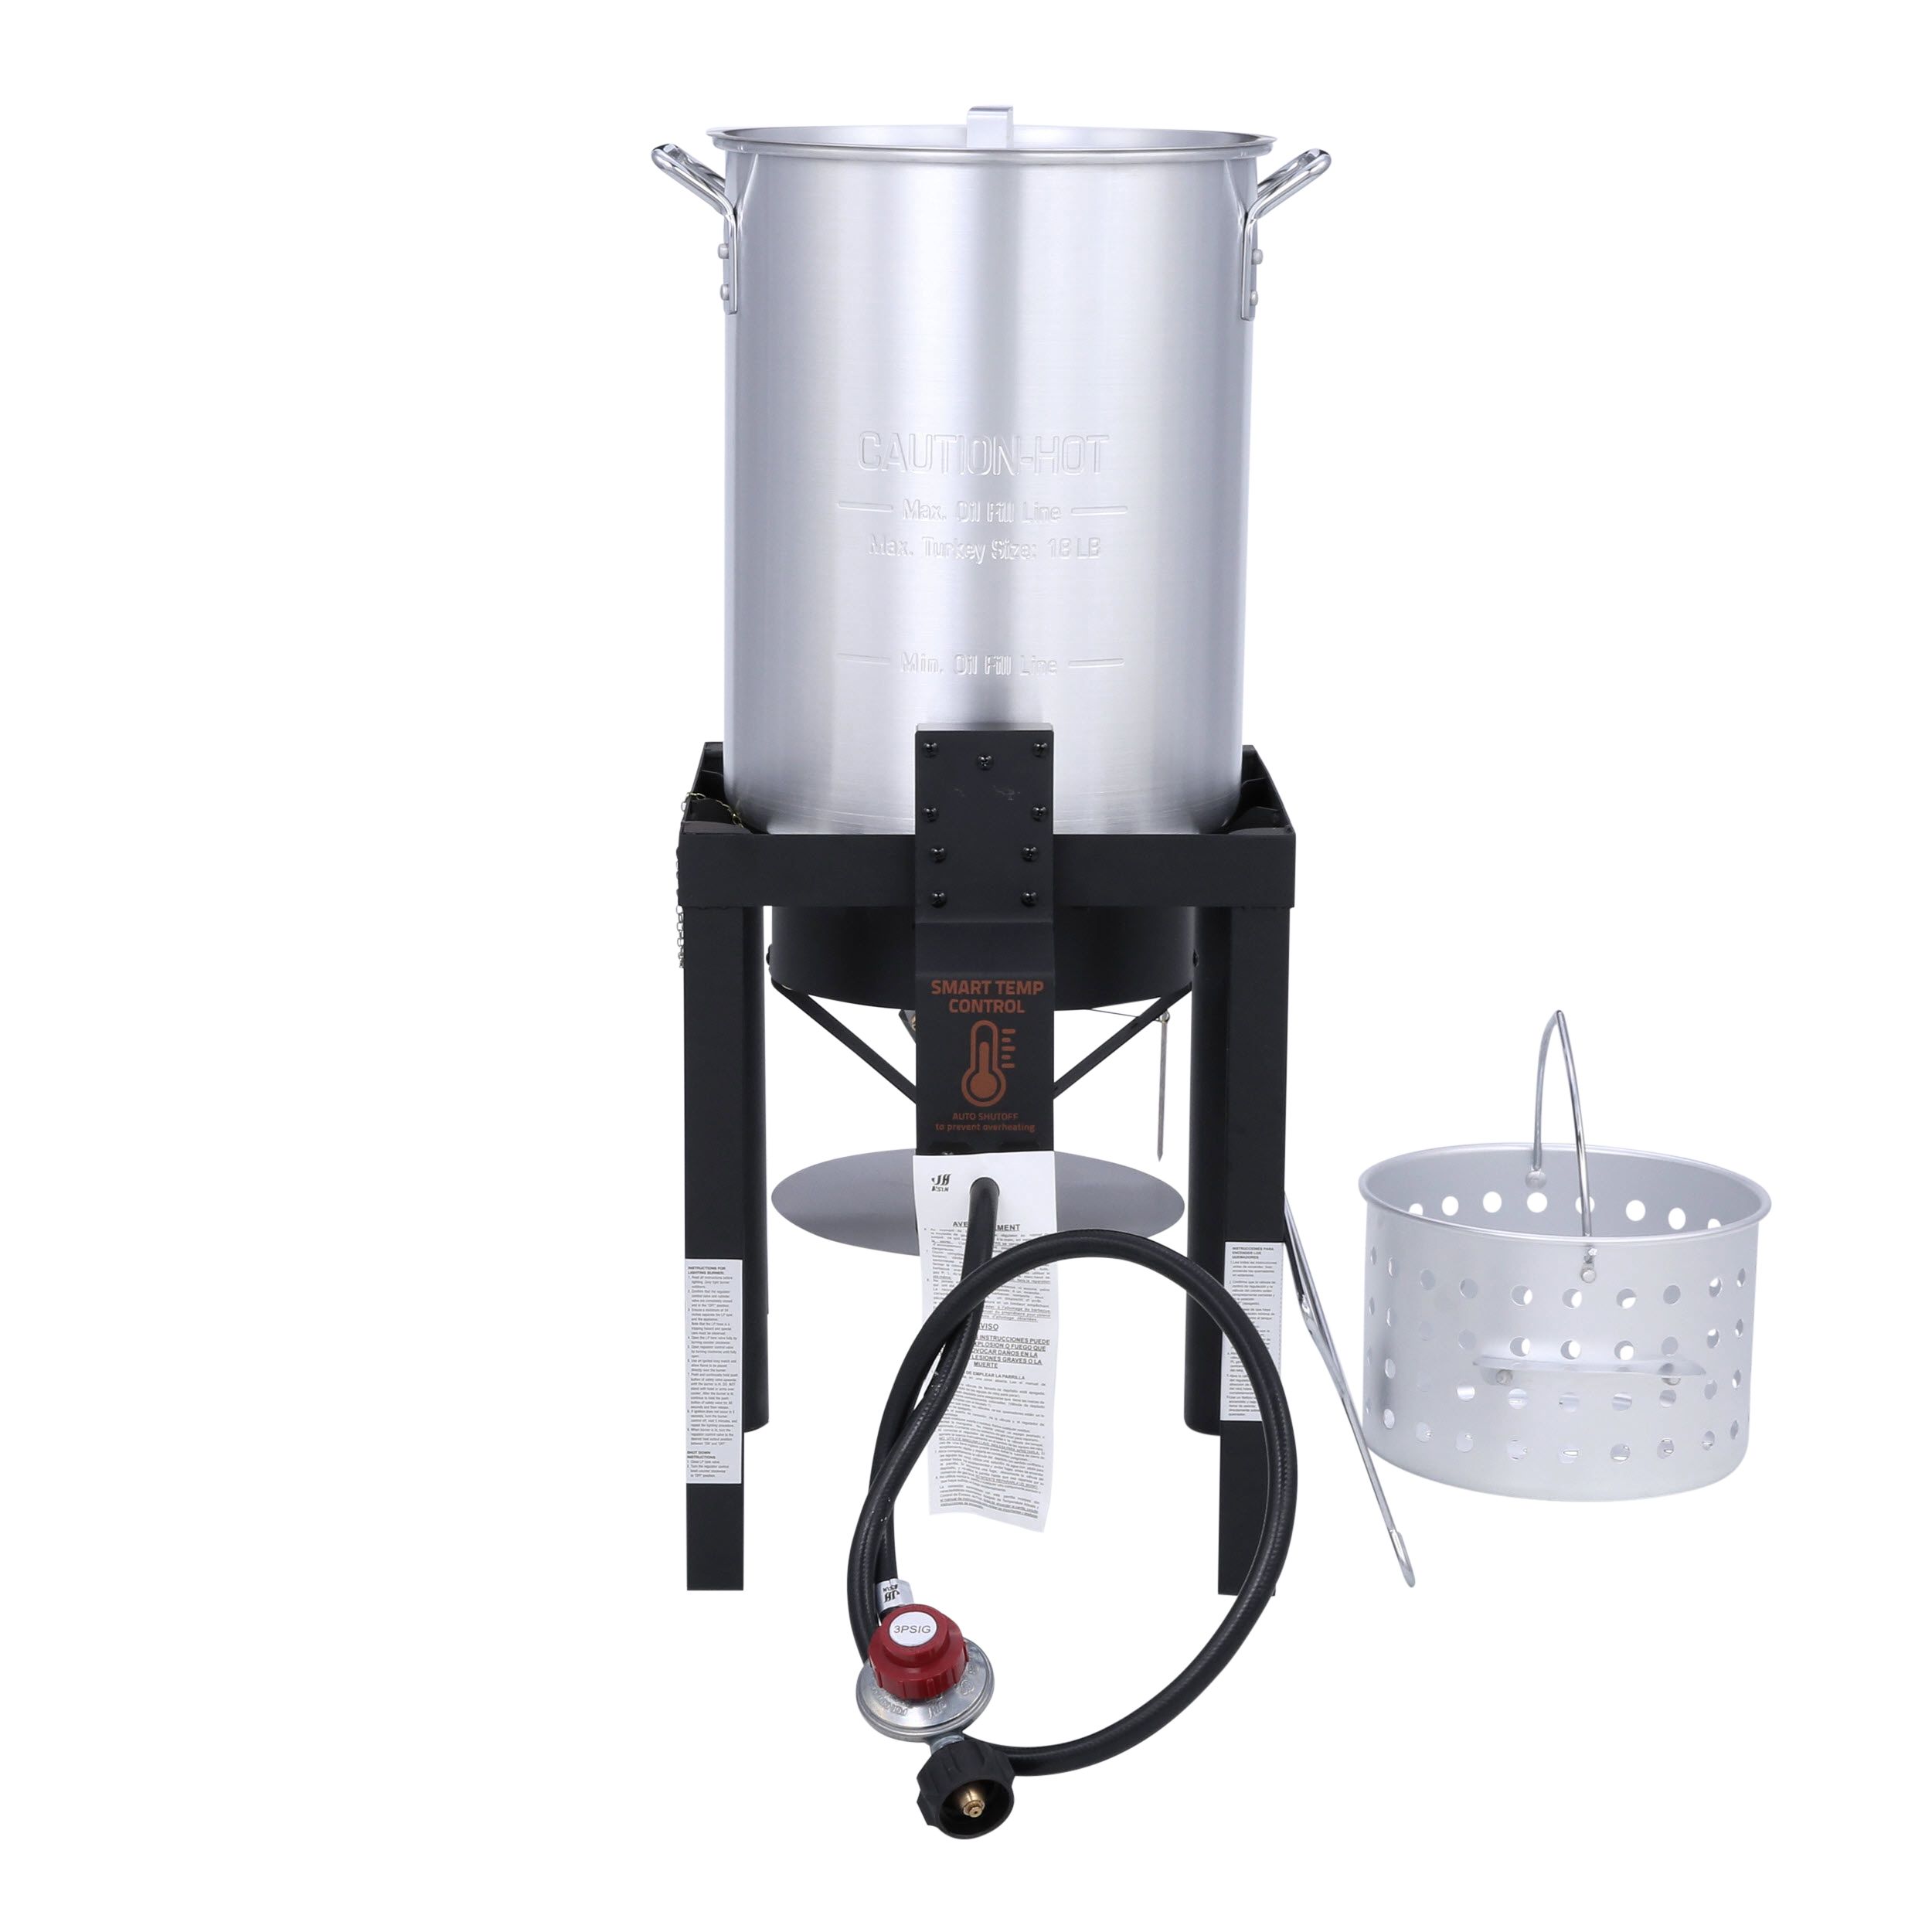 LoCo COOKERS Propane Turkey Fryer 30-Quart Cylinder Manual Ignition Gas ...